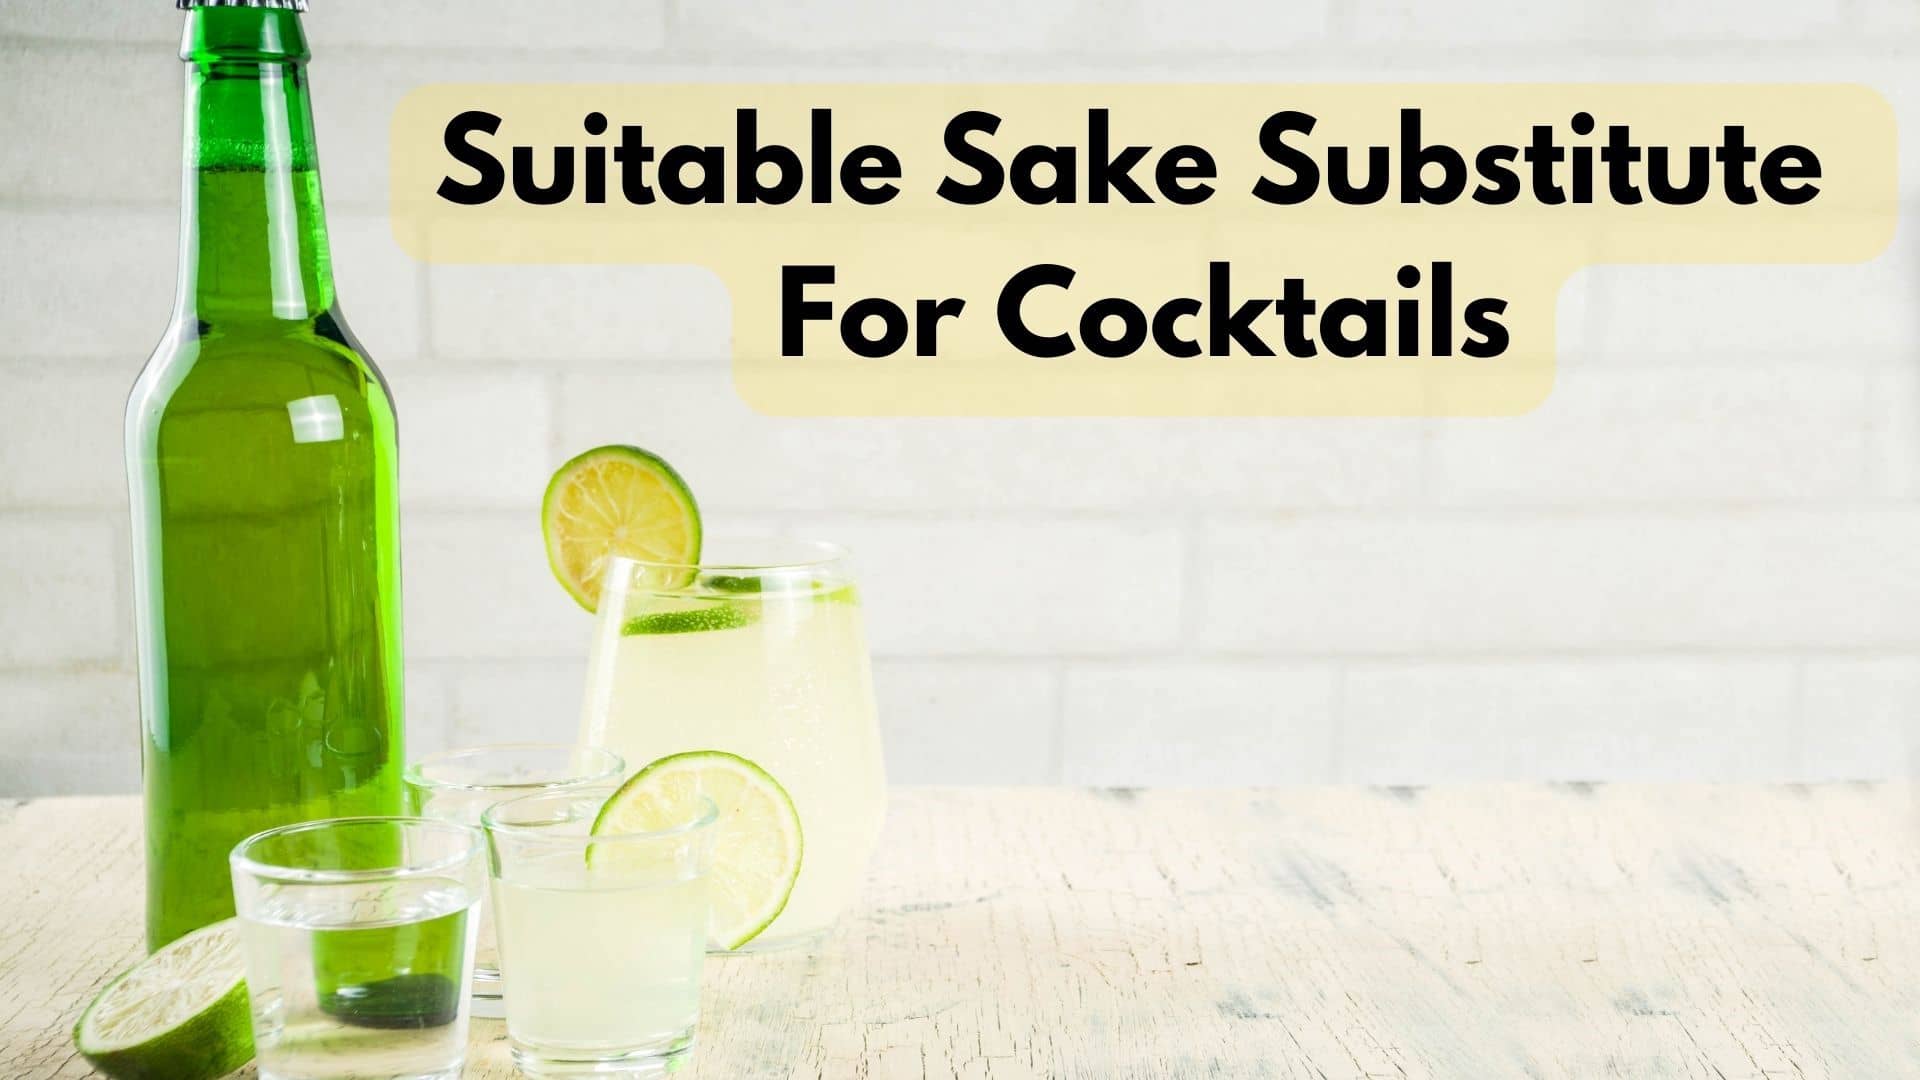 Is There Any Suitable Sake Substitute For Cocktails